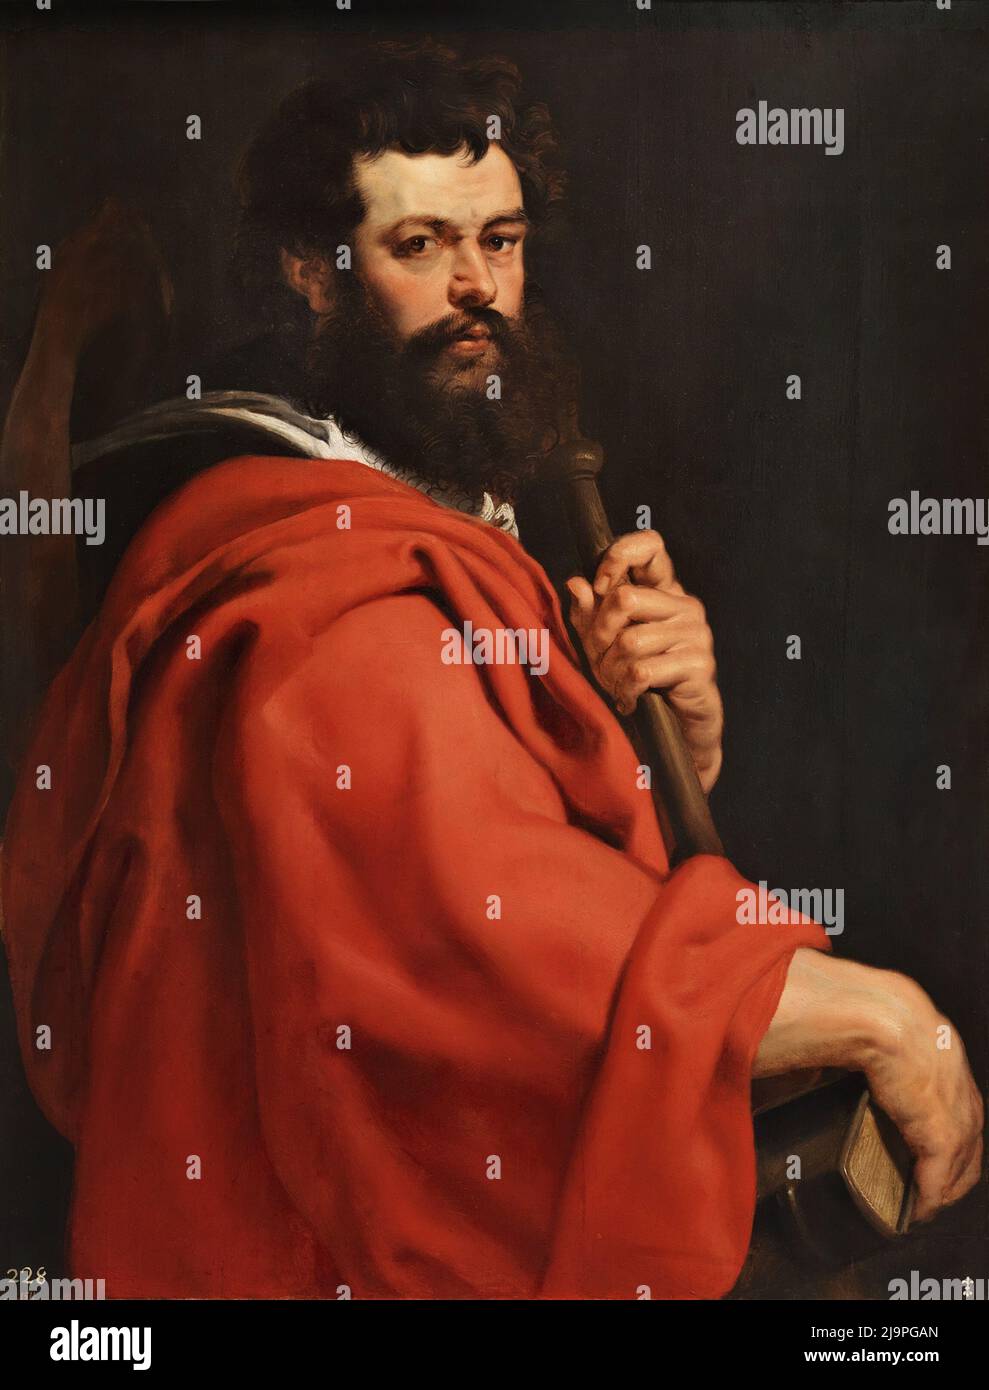 Saint James, one of Jesus's 12 disciples, painted by Peter Paul Rubens Stock Photo